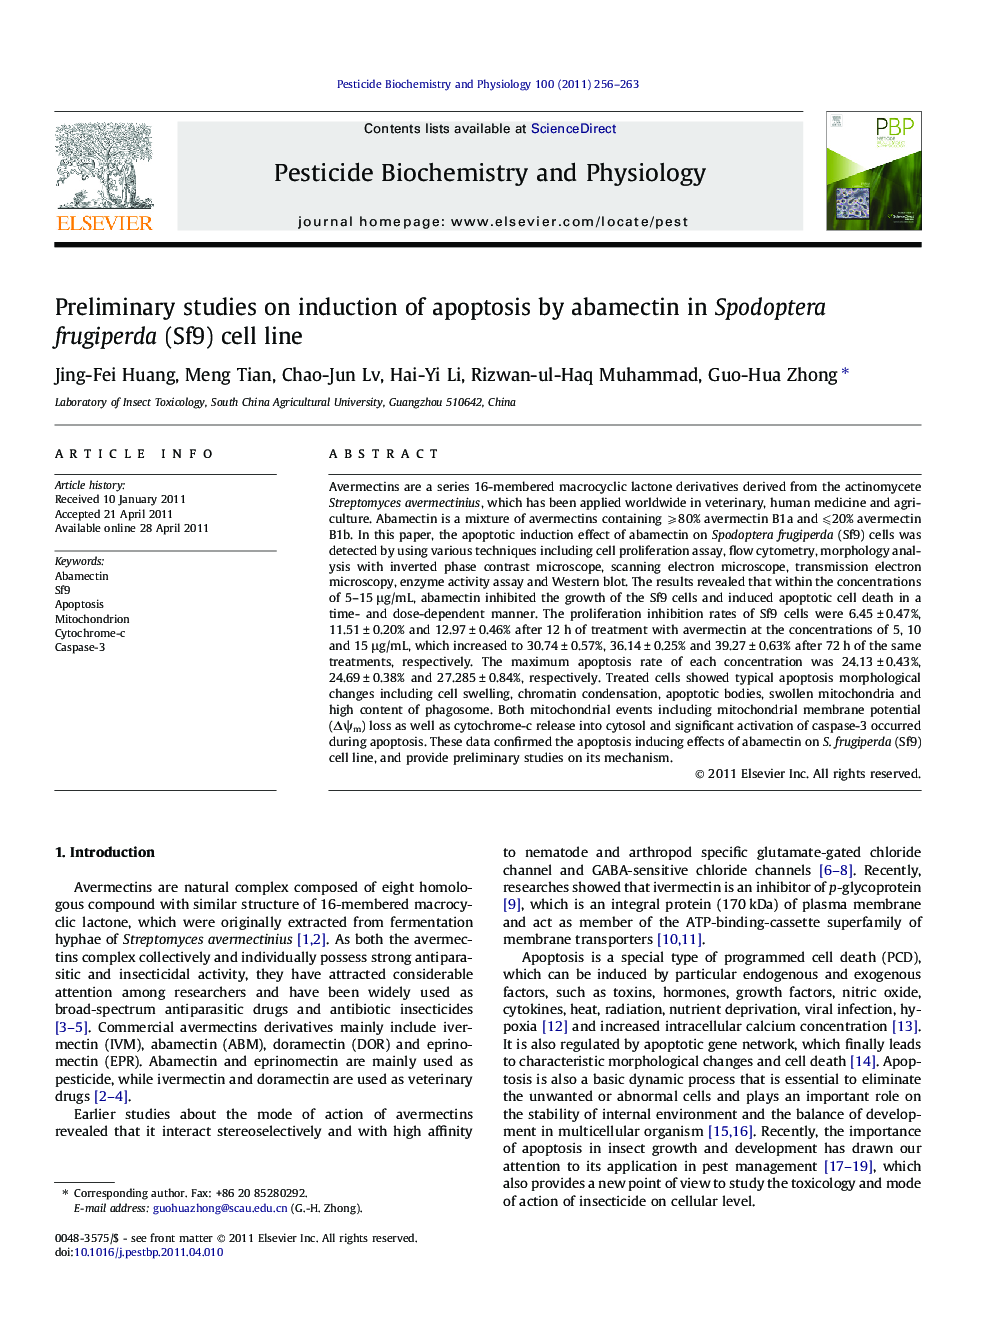 Preliminary studies on induction of apoptosis by abamectin in Spodoptera frugiperda (Sf9) cell line